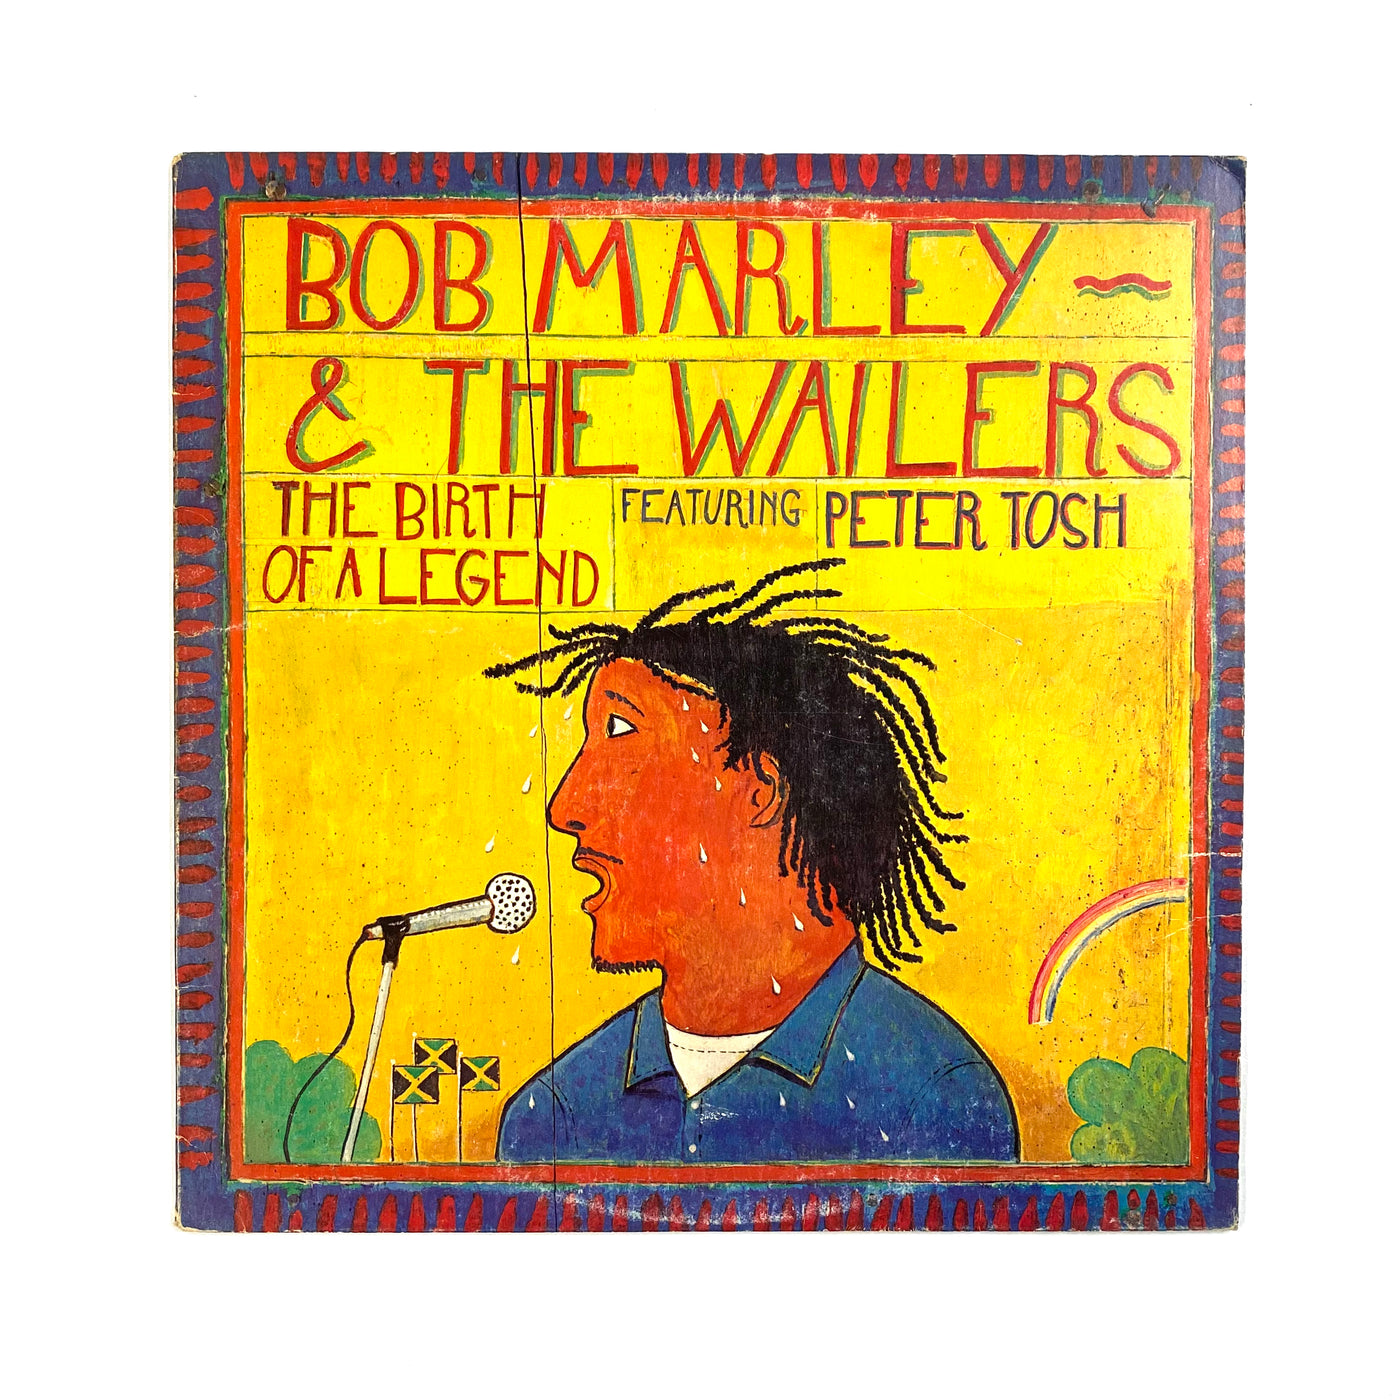 Bob Marley & The Wailers Feat. Peter Tosh - The Birth Of A Legend